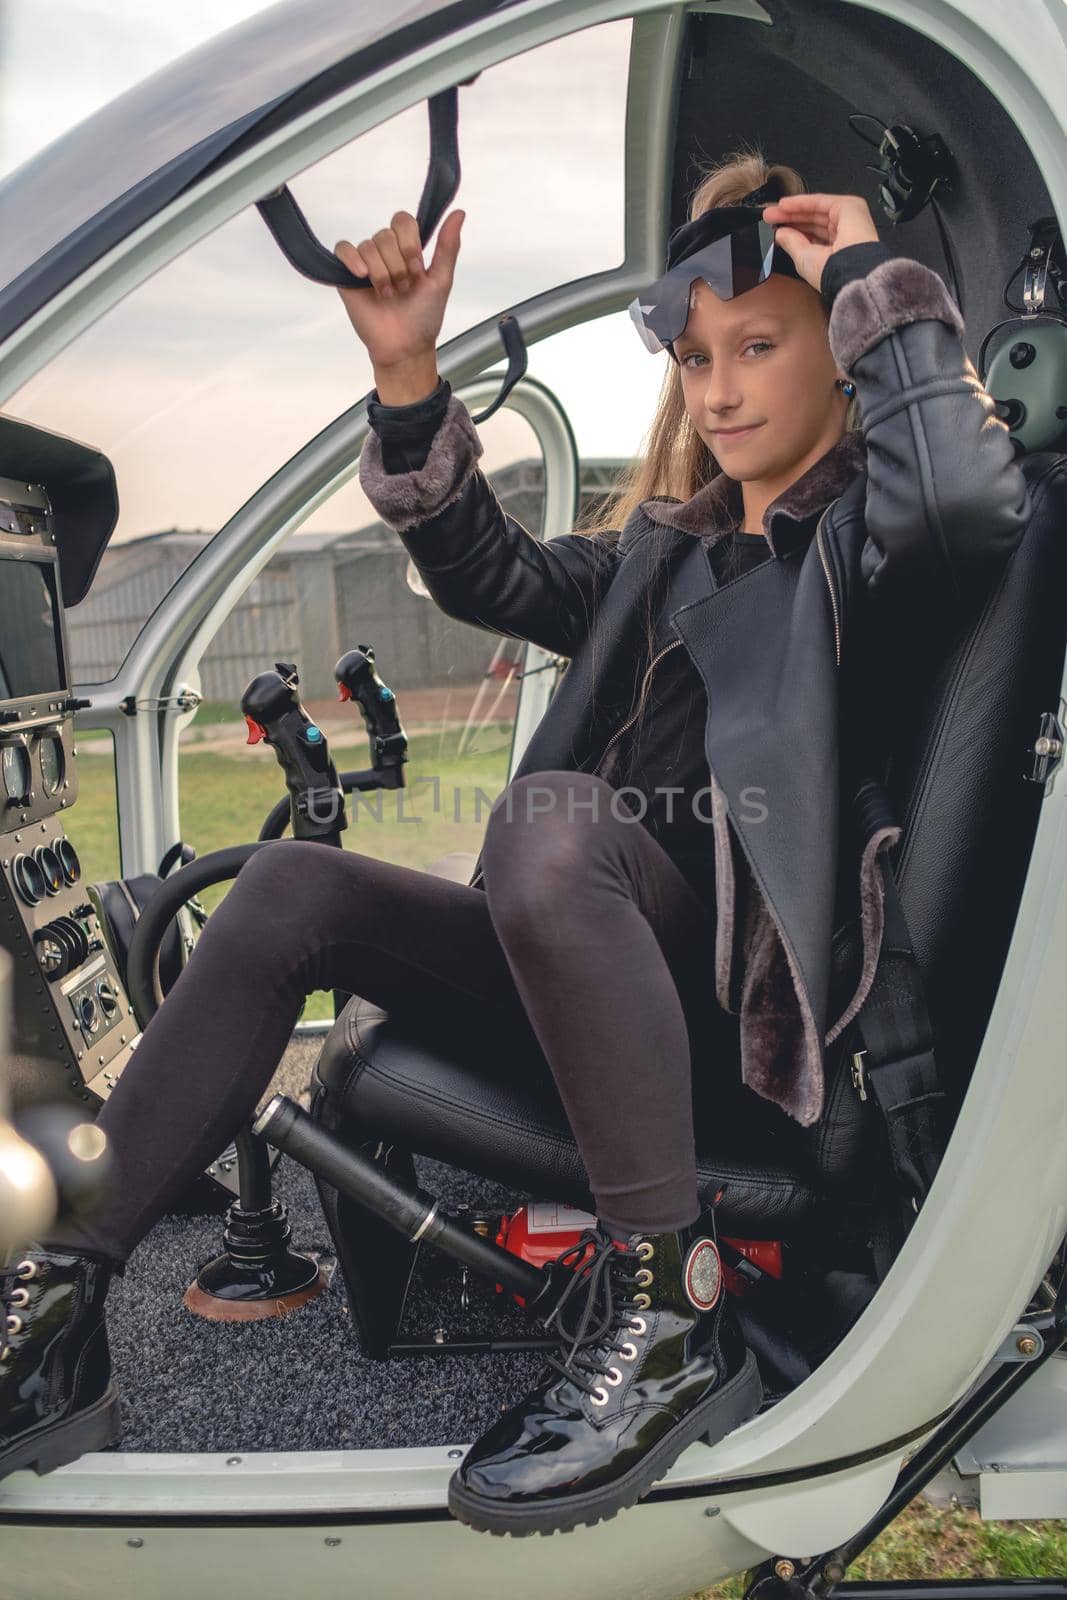 Long-haired tween girl looking confidently at camera lifting slightly her sunglasses while sitting in cockpit of light passenger helicopter on spring day